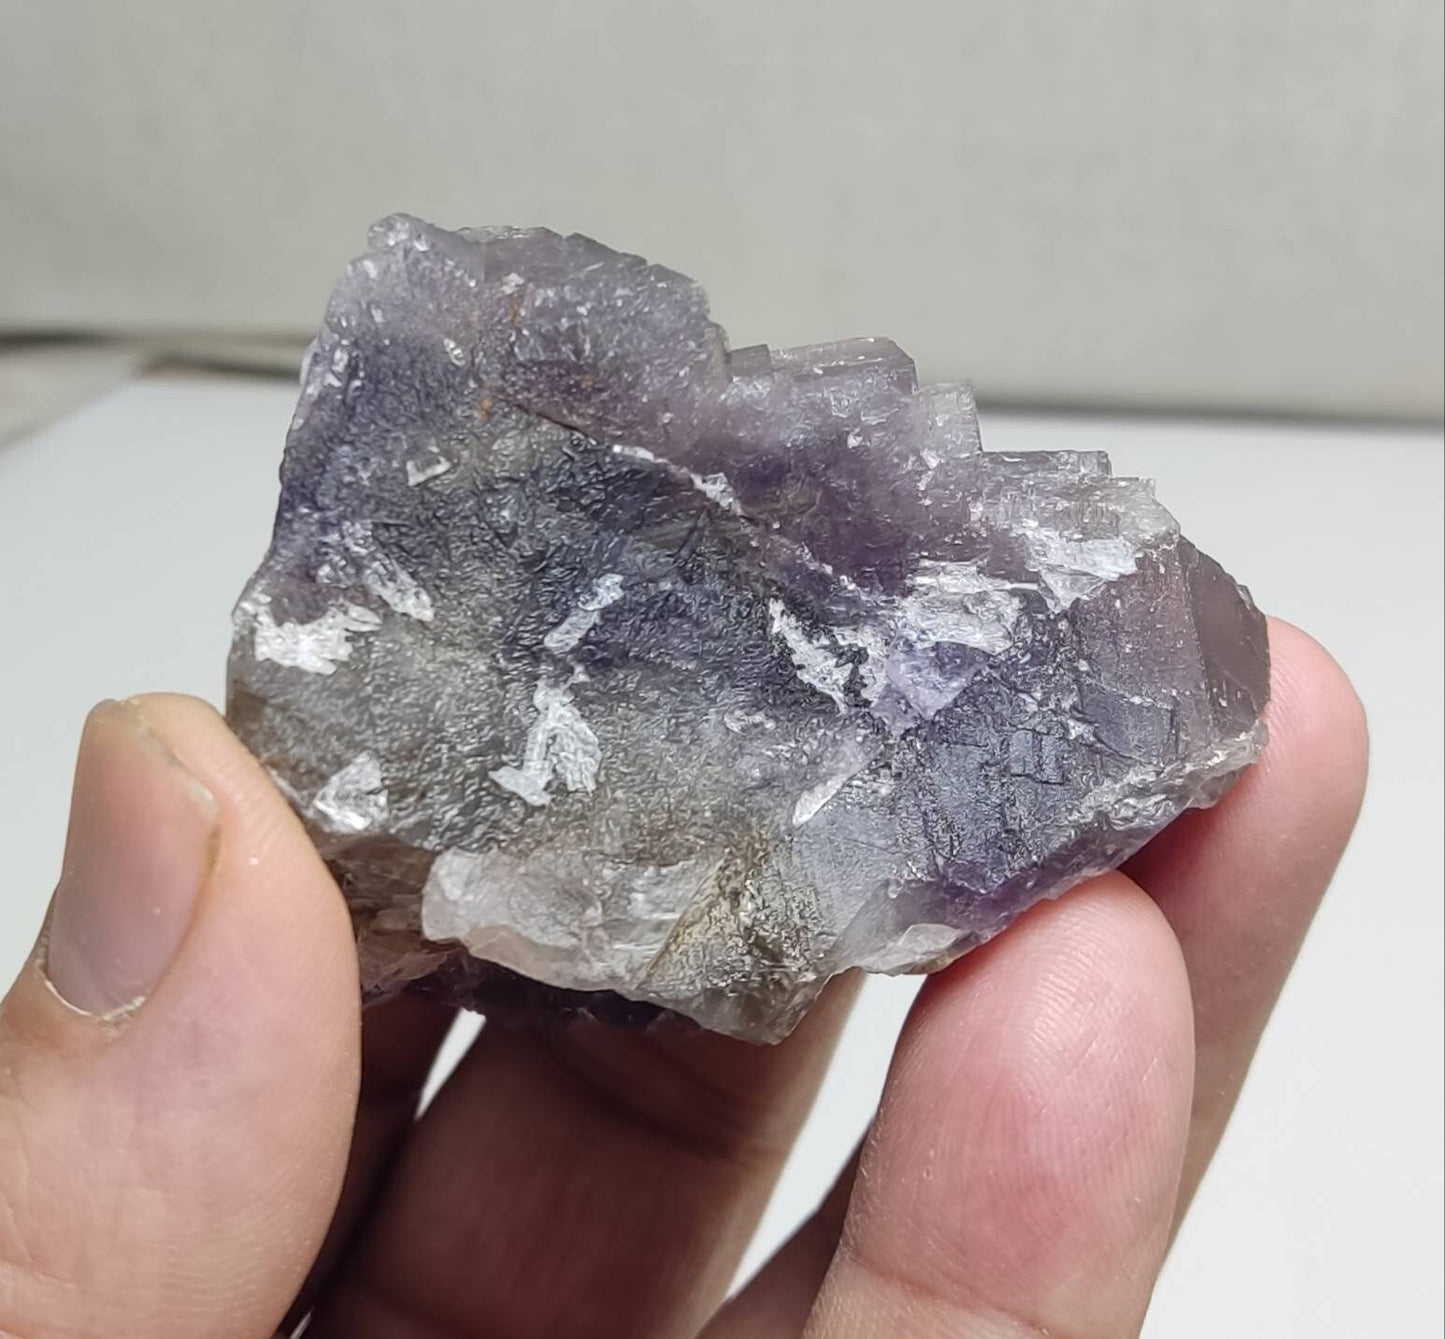 An amazing Single beautiful specimen of grey/purple fluorite with calcite crystals 150 grams